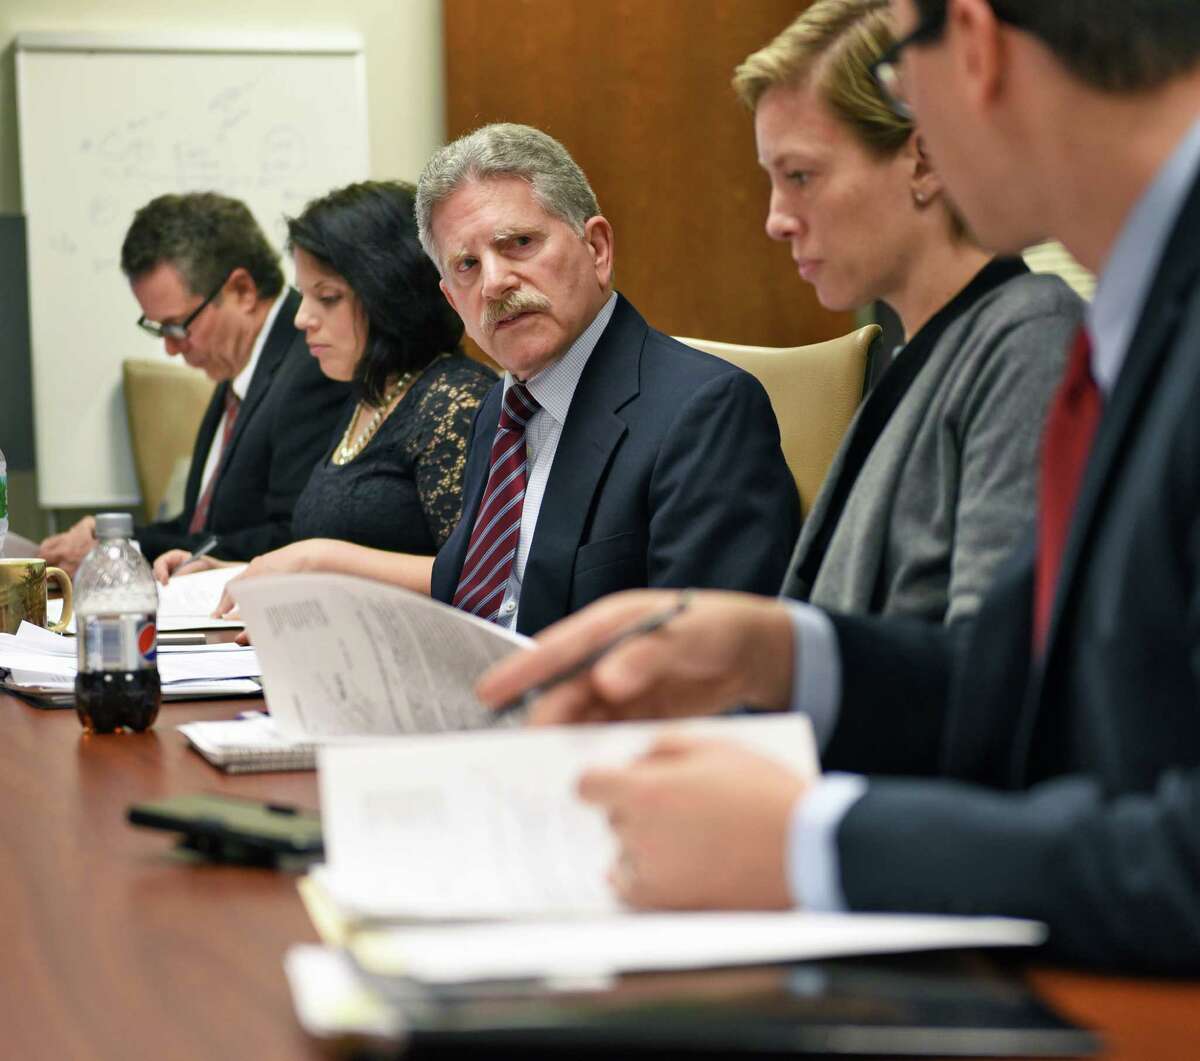 Executive director Robert Freeman, center, during the annual meeting of the NYS Committee on Open Government as it discusses it's annual report that will call for the repeal of a state law that prohibits the public disclosure of police officers' personnel records without a court order Wednesday Nov. 30, 2016 in Albany, NY. (John Carl D'Annibale / Times Union)